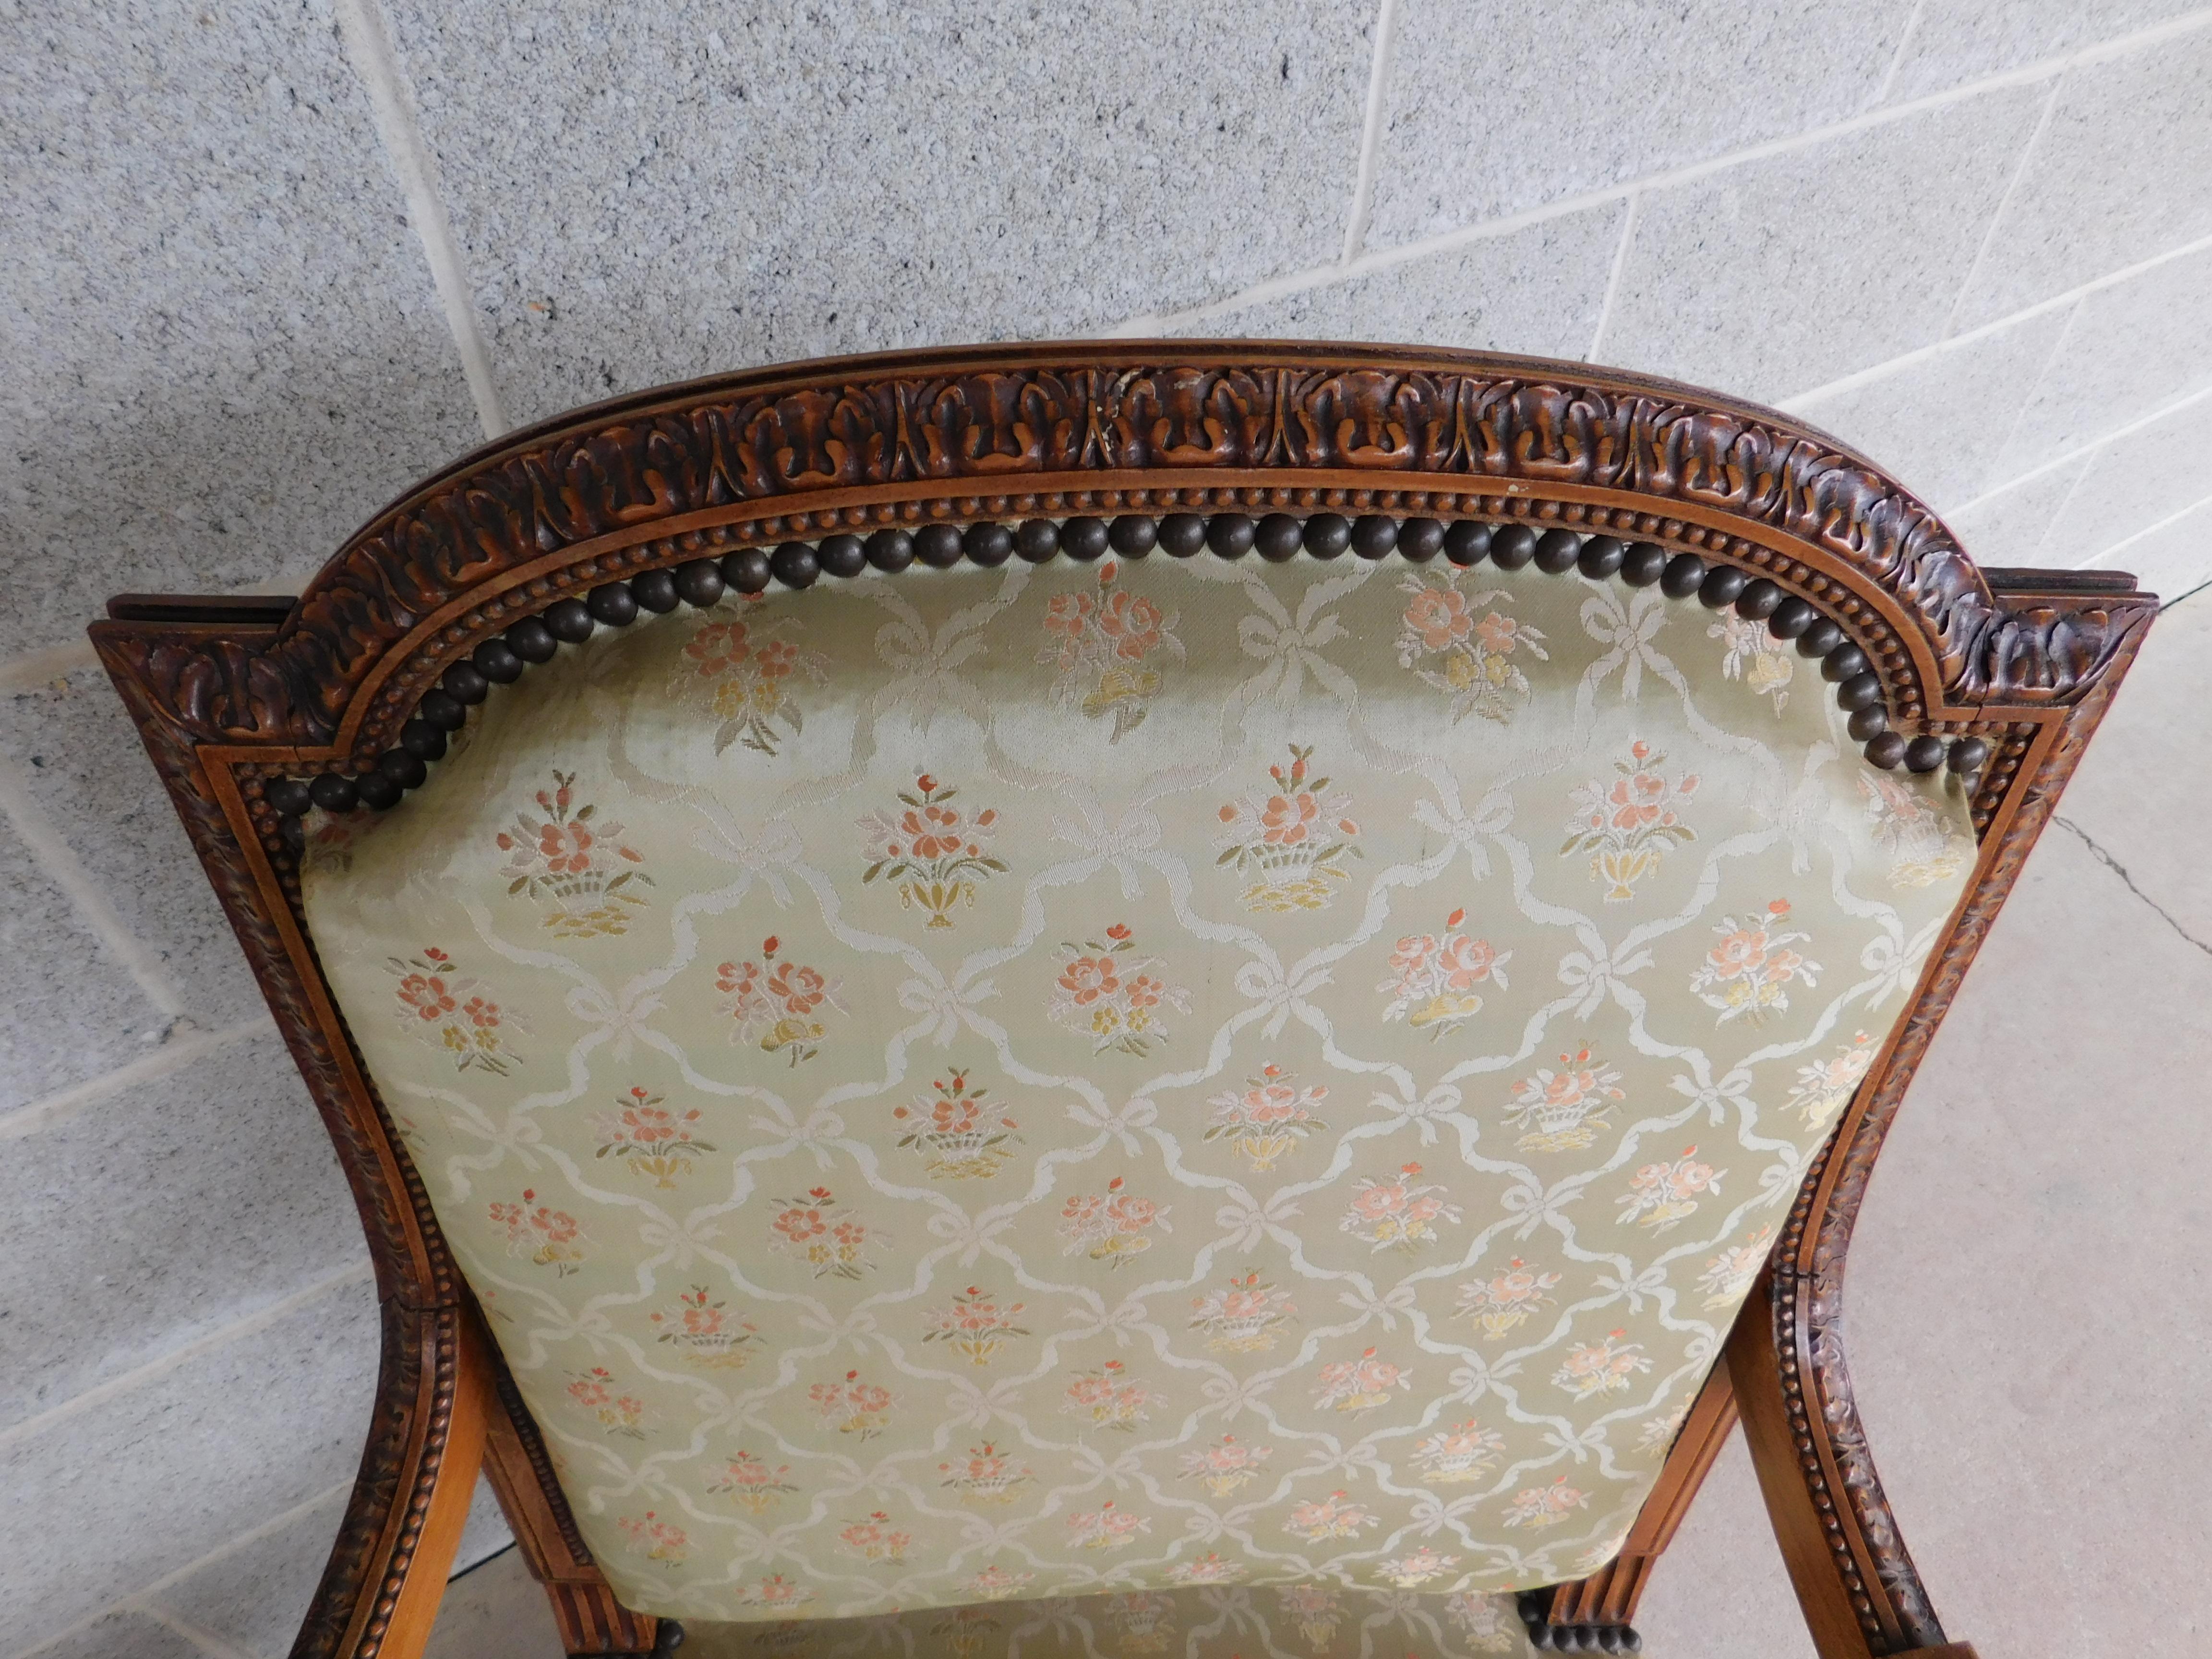 Antique French Louis XVI Style Fauteuil Chairs Late 19th Century, a Pair For Sale 3